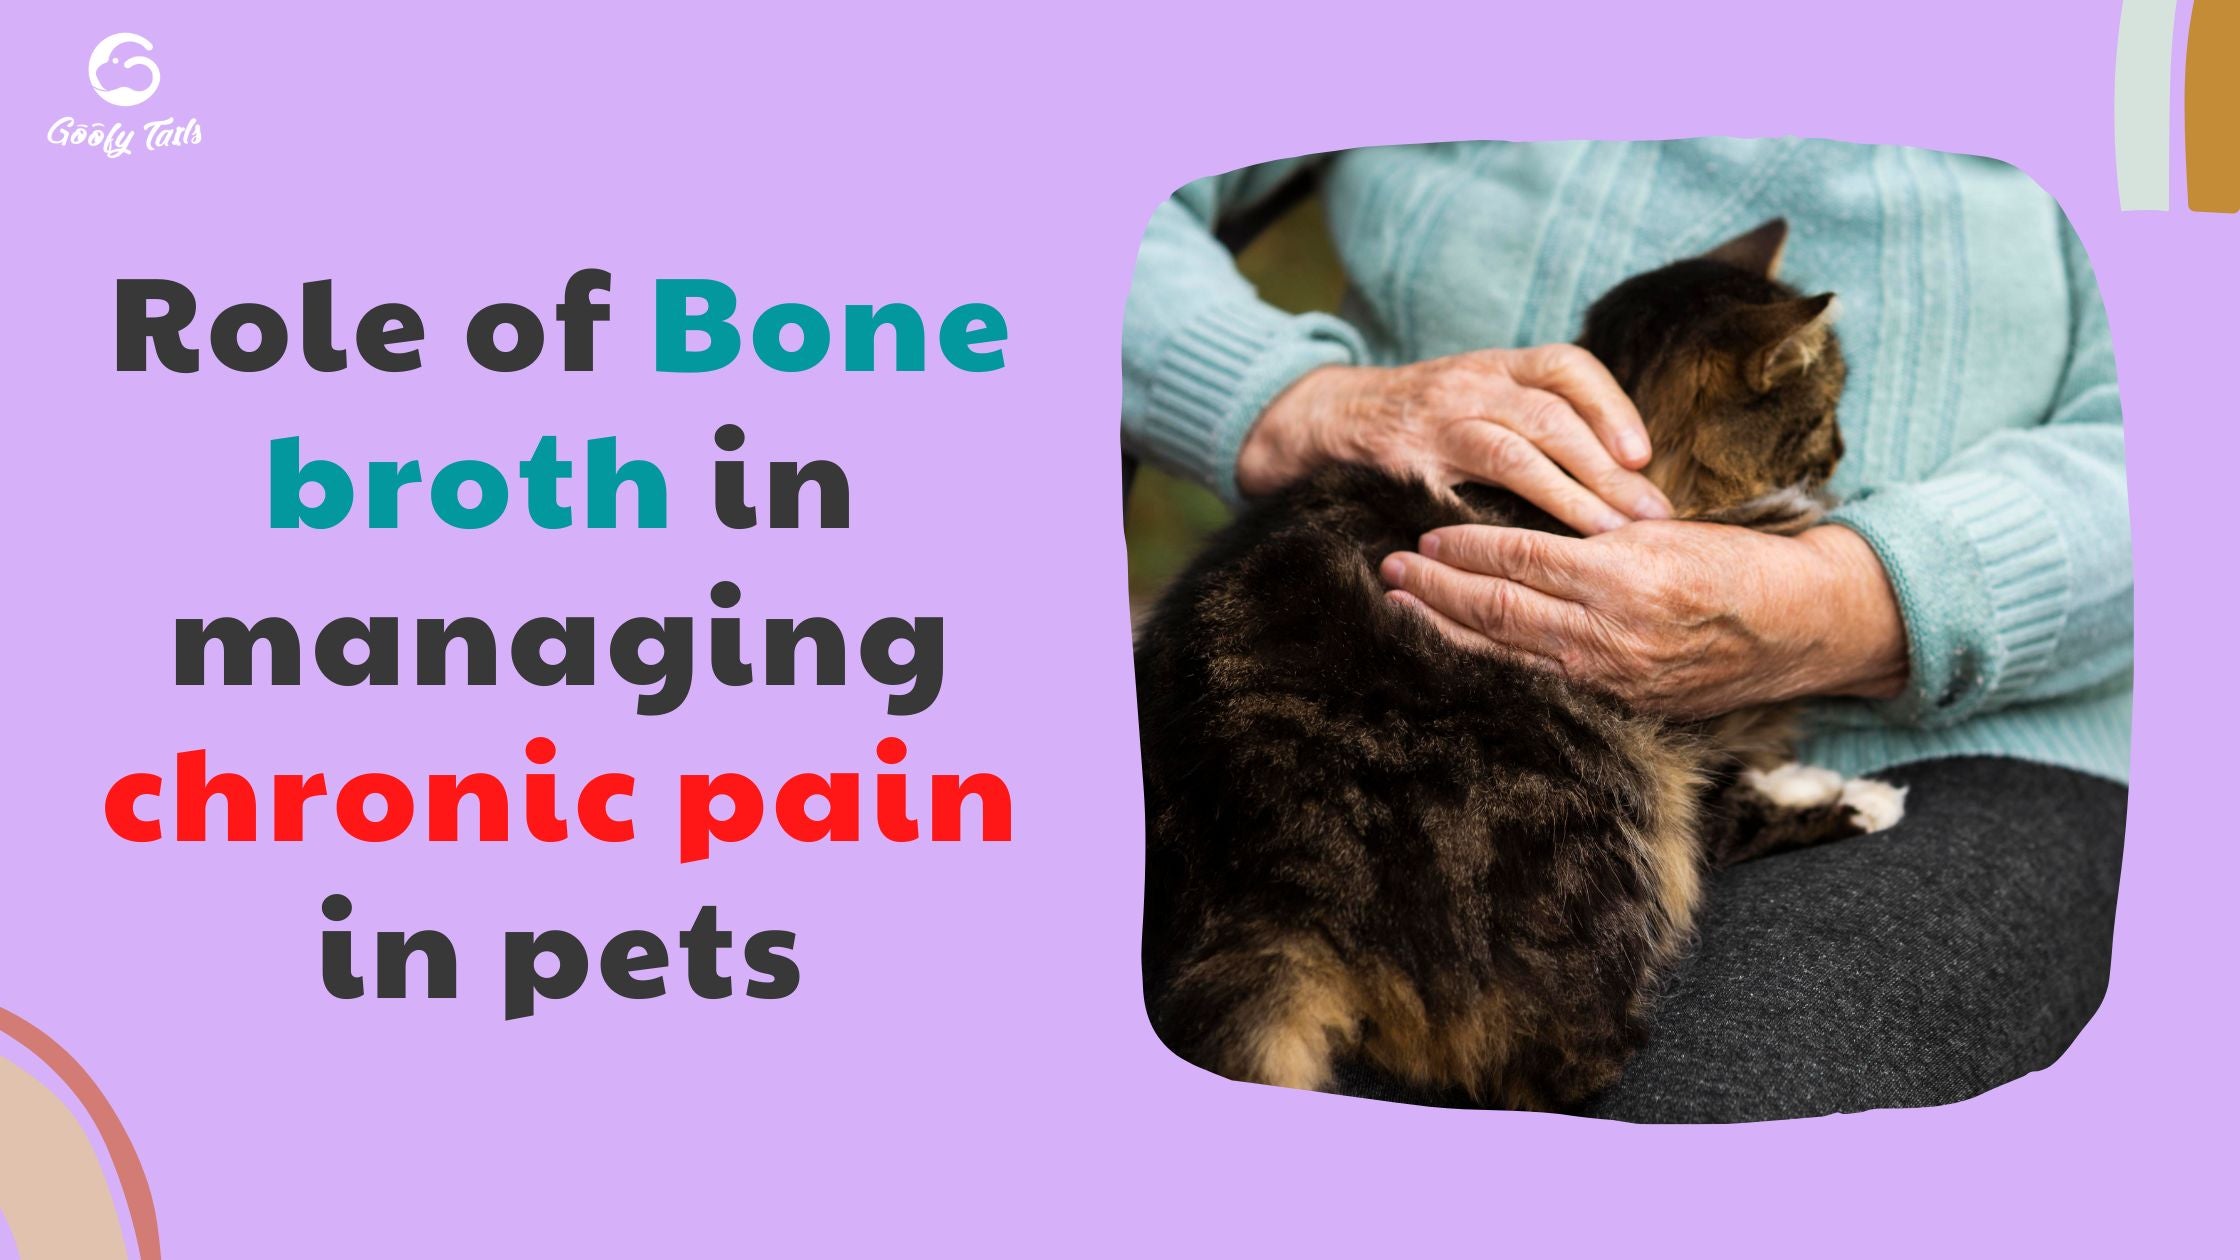 Role of Bone broth in managing chronic pain in pets